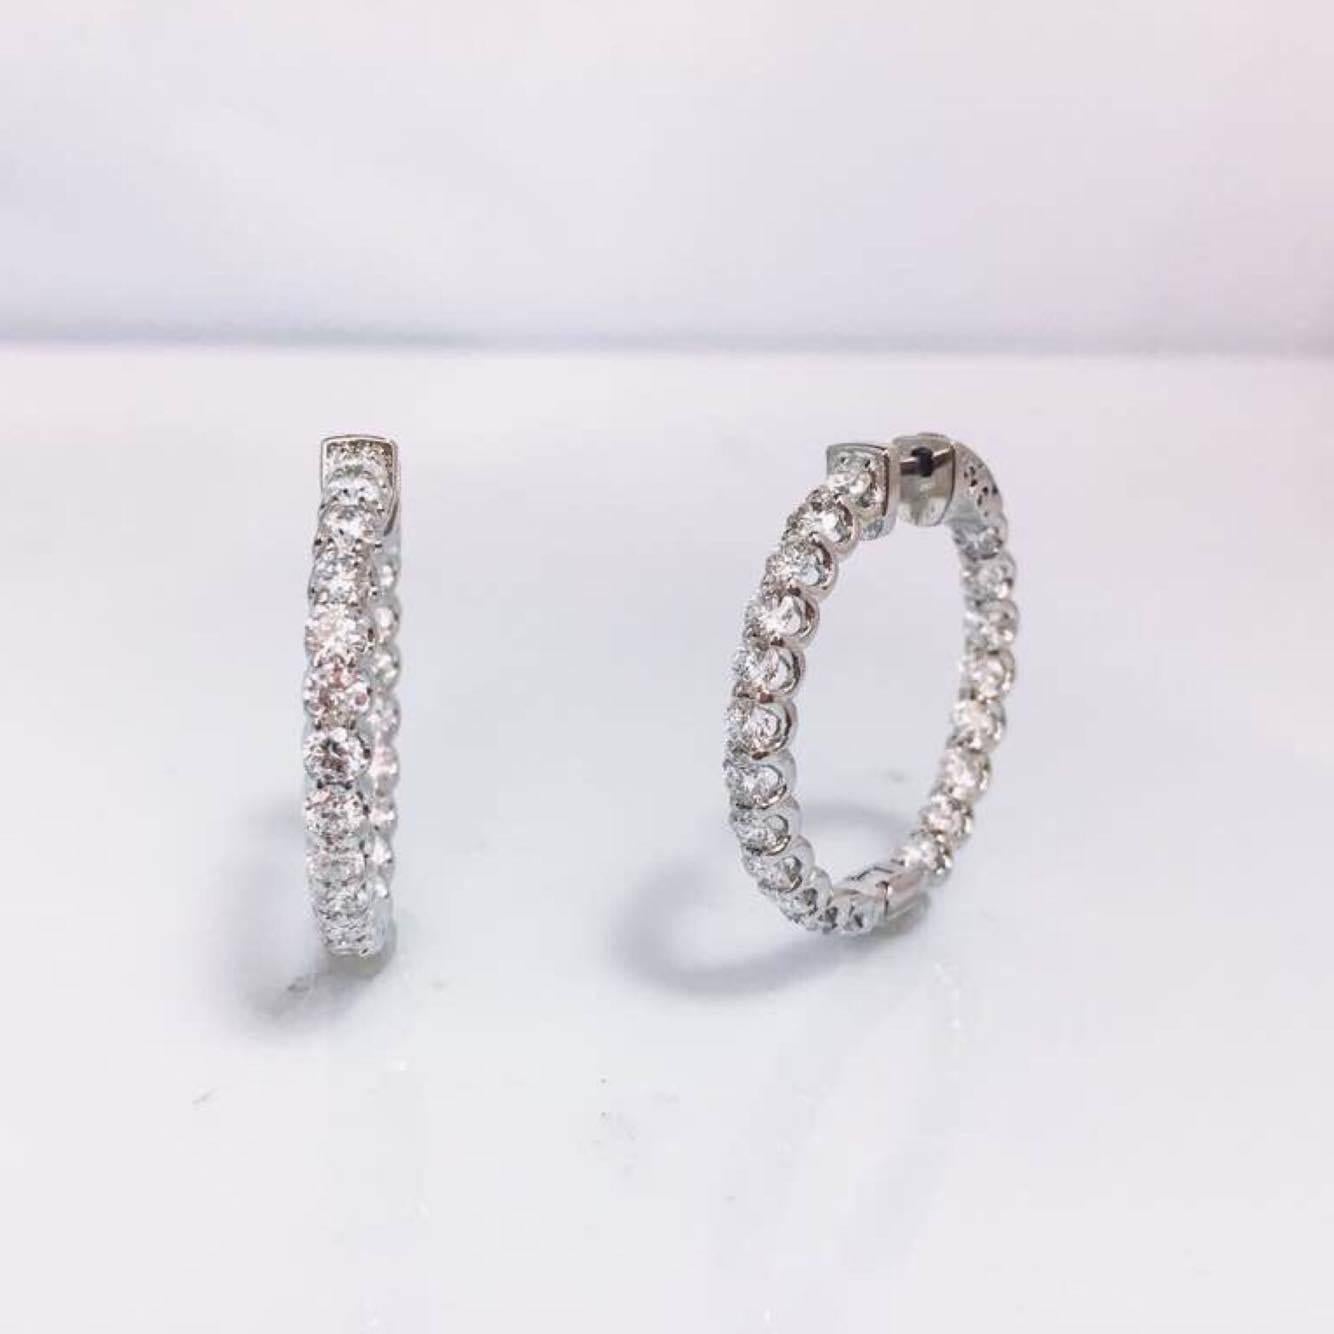 Manufactured by Emilio! here in our World Diamond Tower Headquarters on New York's world famous Fifth avenue. These hoops are unique! We set conflict free excellent cut diamonds 
F color
VVS clarity 
Appox. 4.40 carats total weight 
Push locking